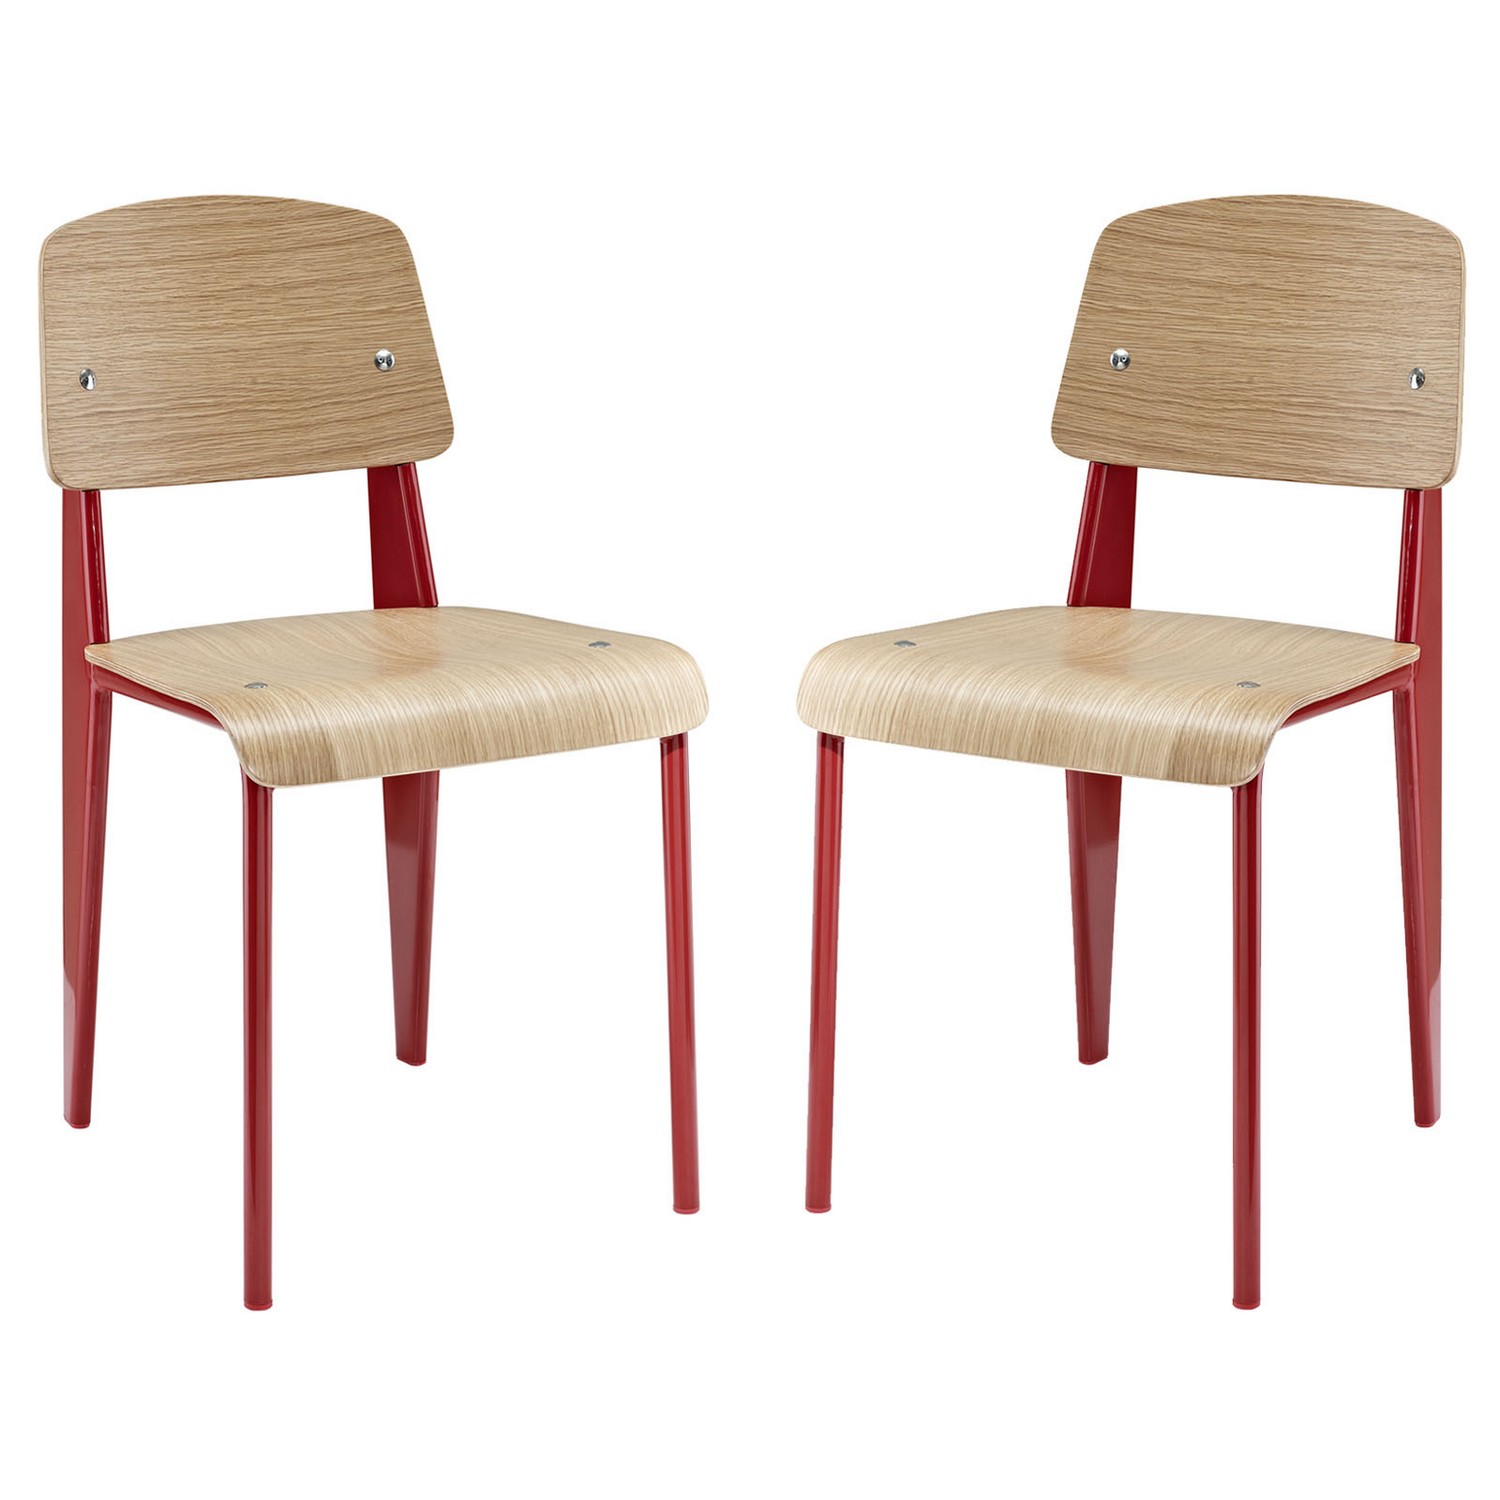 Modway Cabin Dining Side Chair Set of 2 - Red